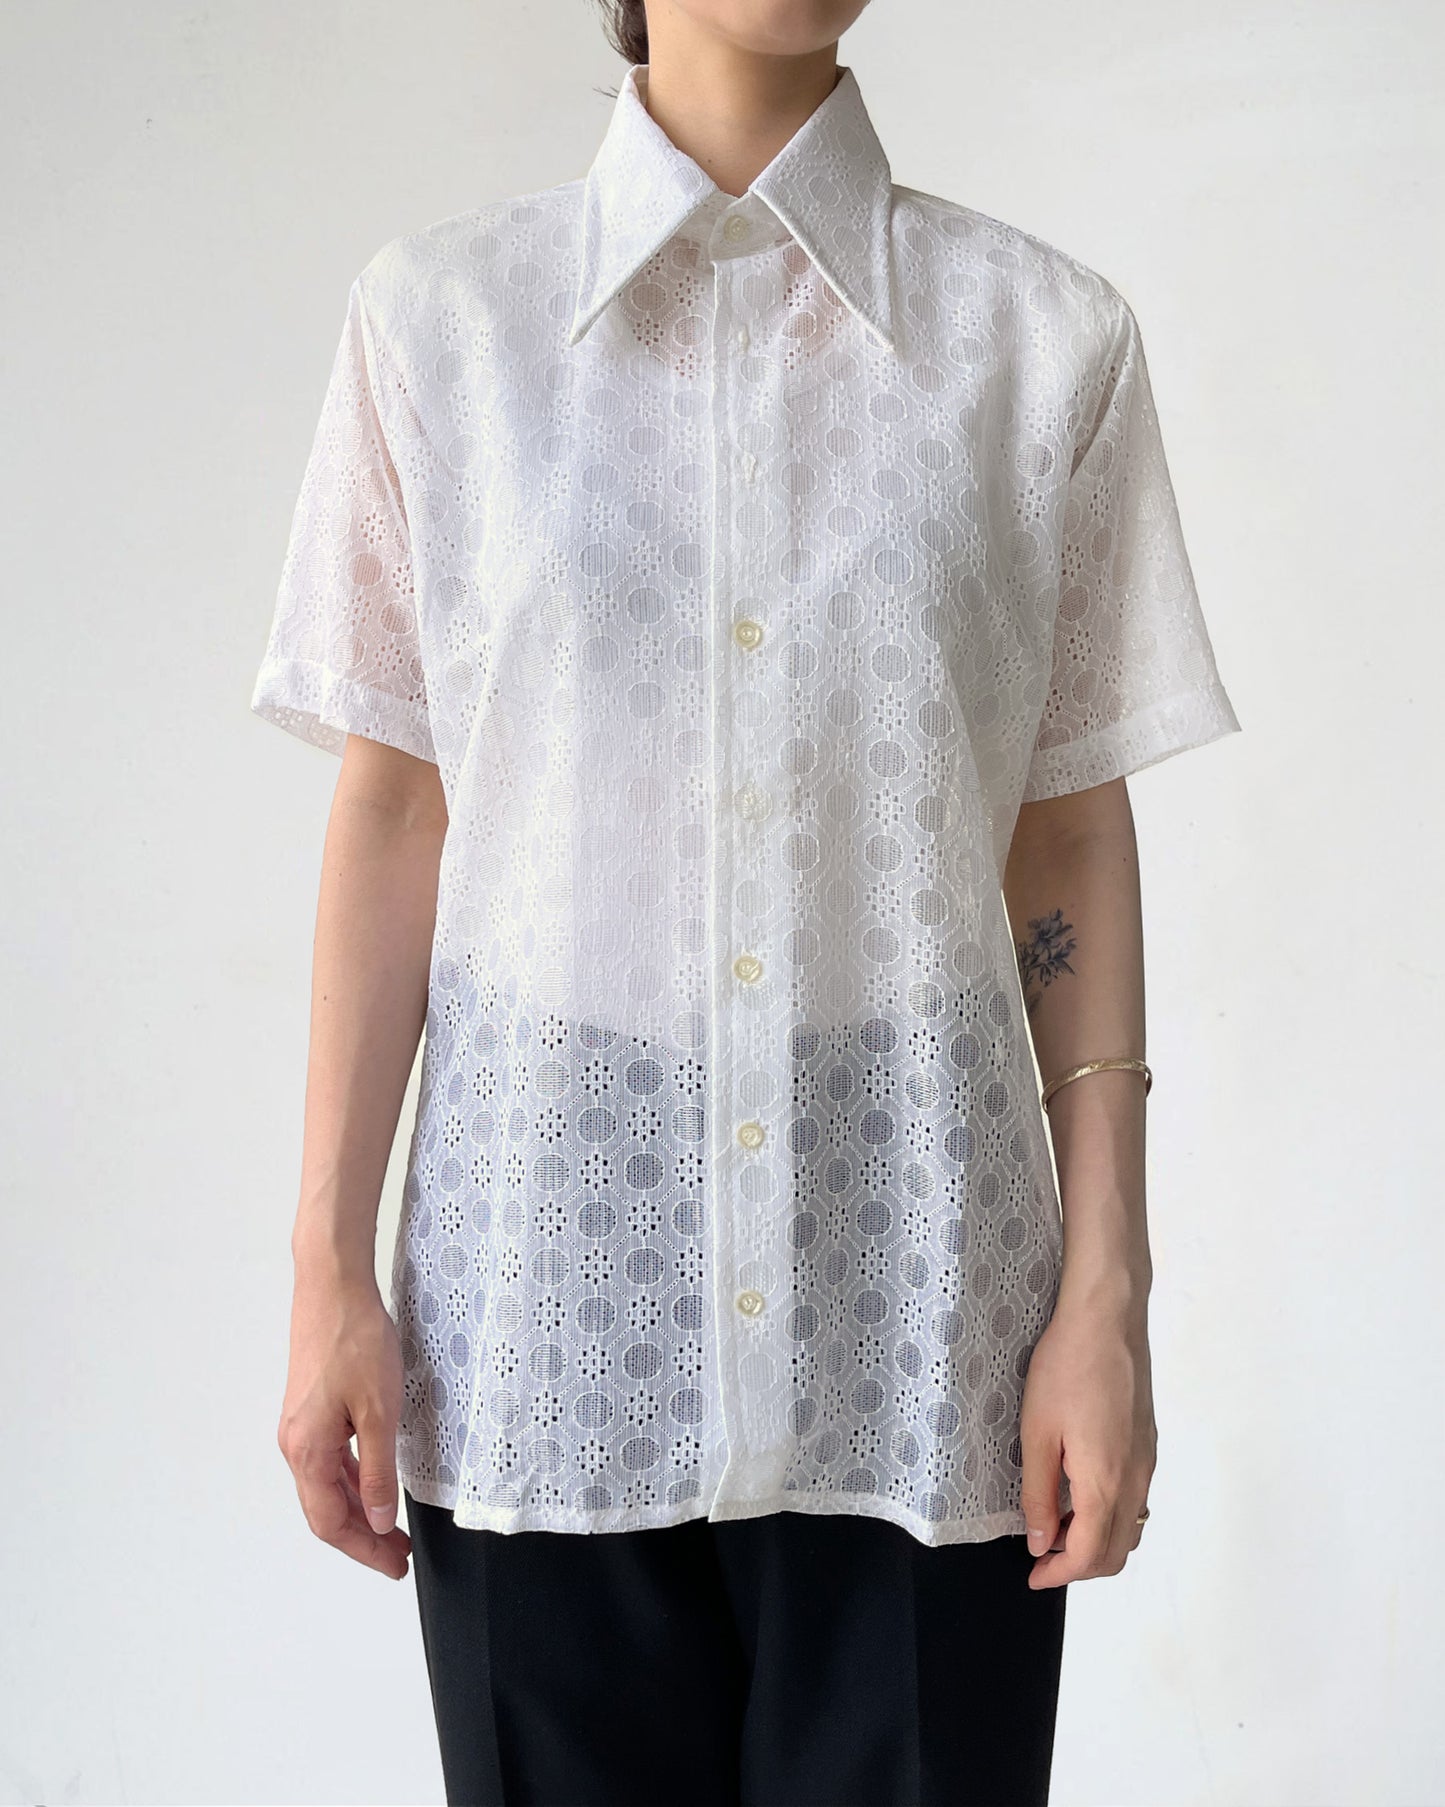 70's White Lace S/S Shirt